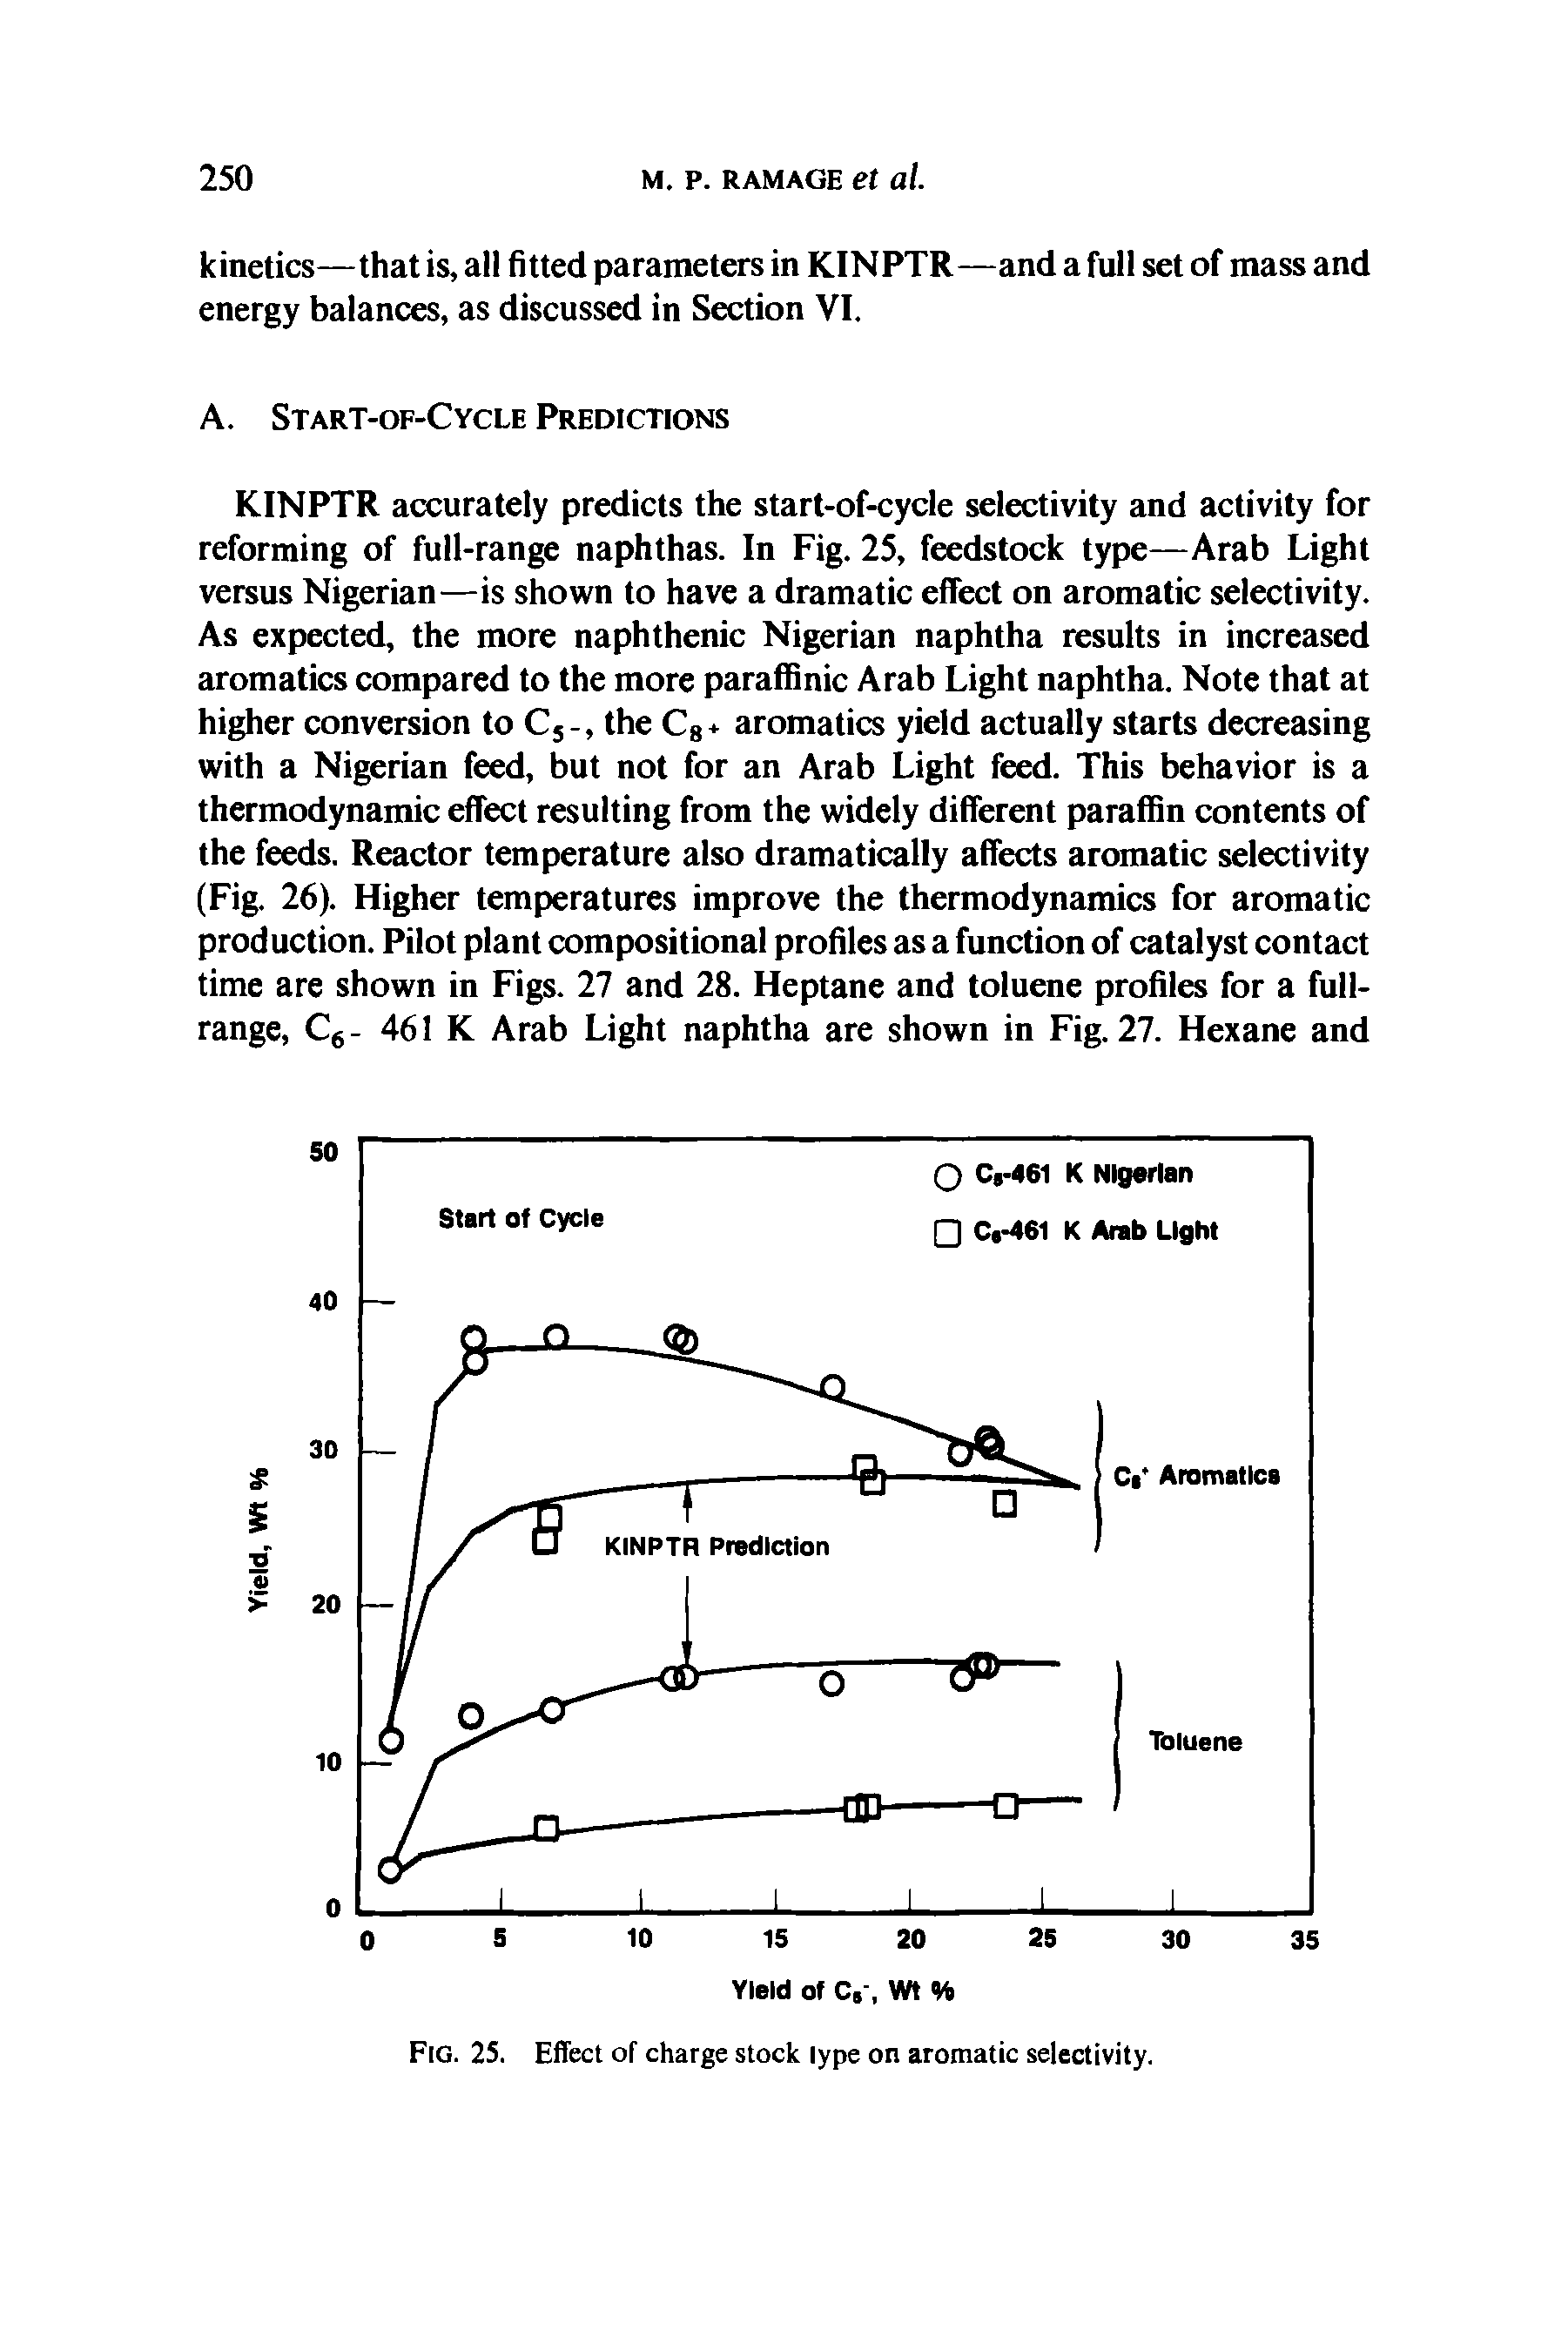 Fig. 25. Effect of charge stock lype on aromatic selectivity.